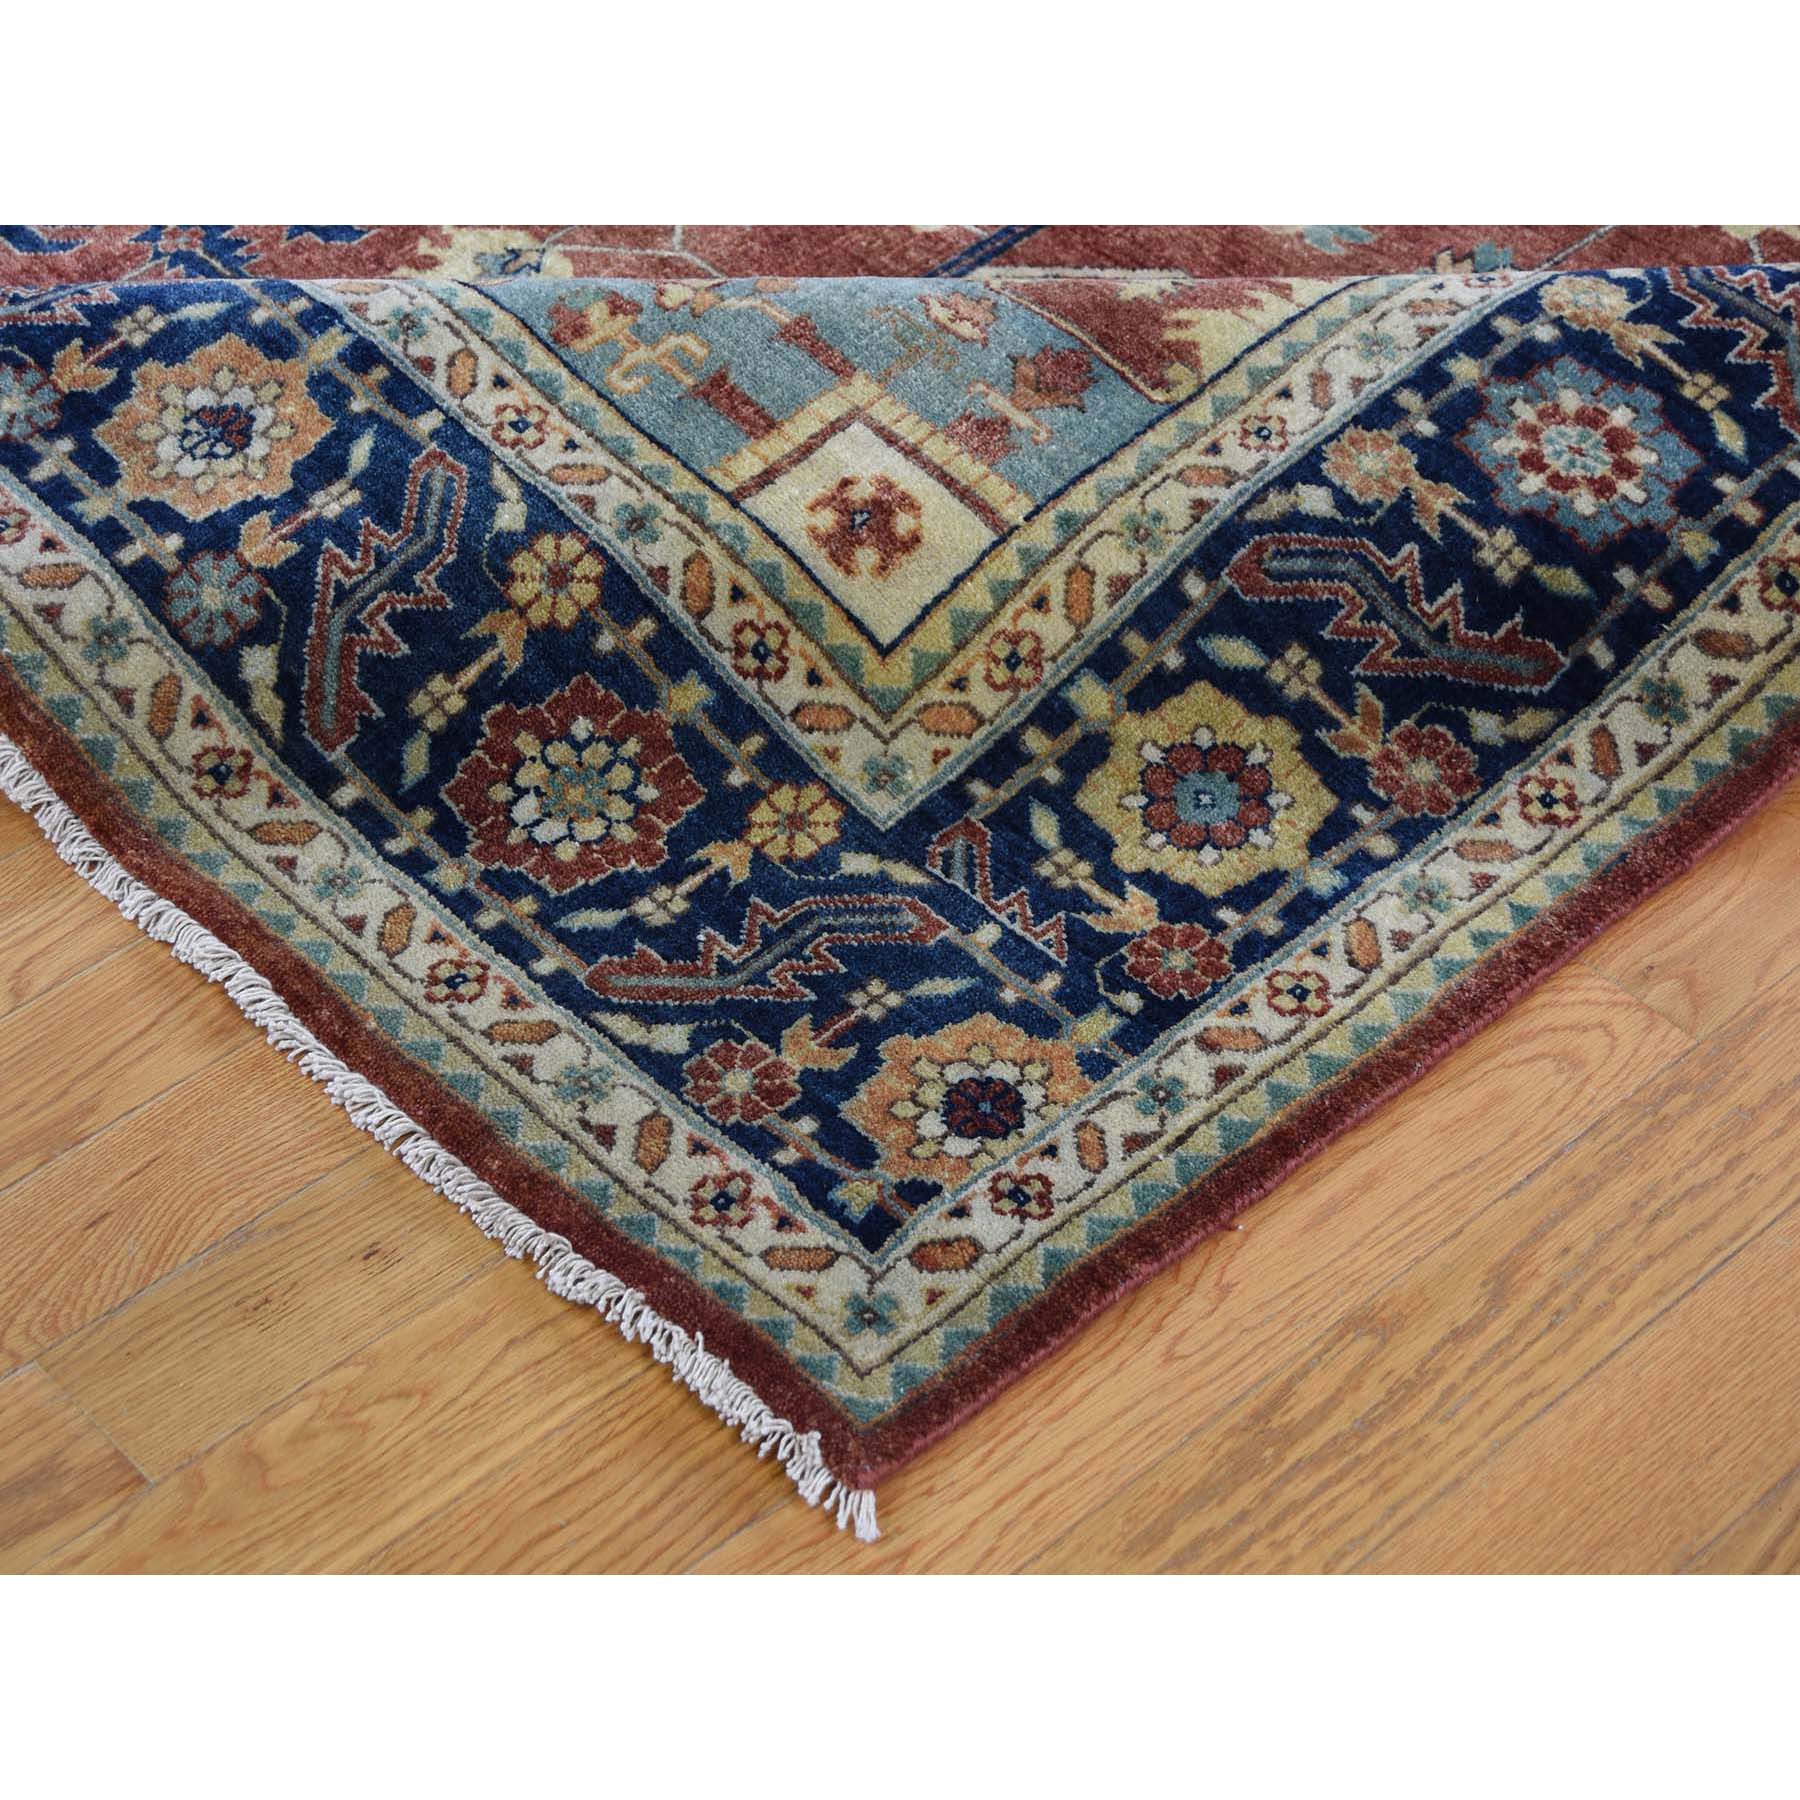 10-1 x13-9  Antiqued Heriz Re-creation Pure Wool Hand Knotted Oriental Rug 